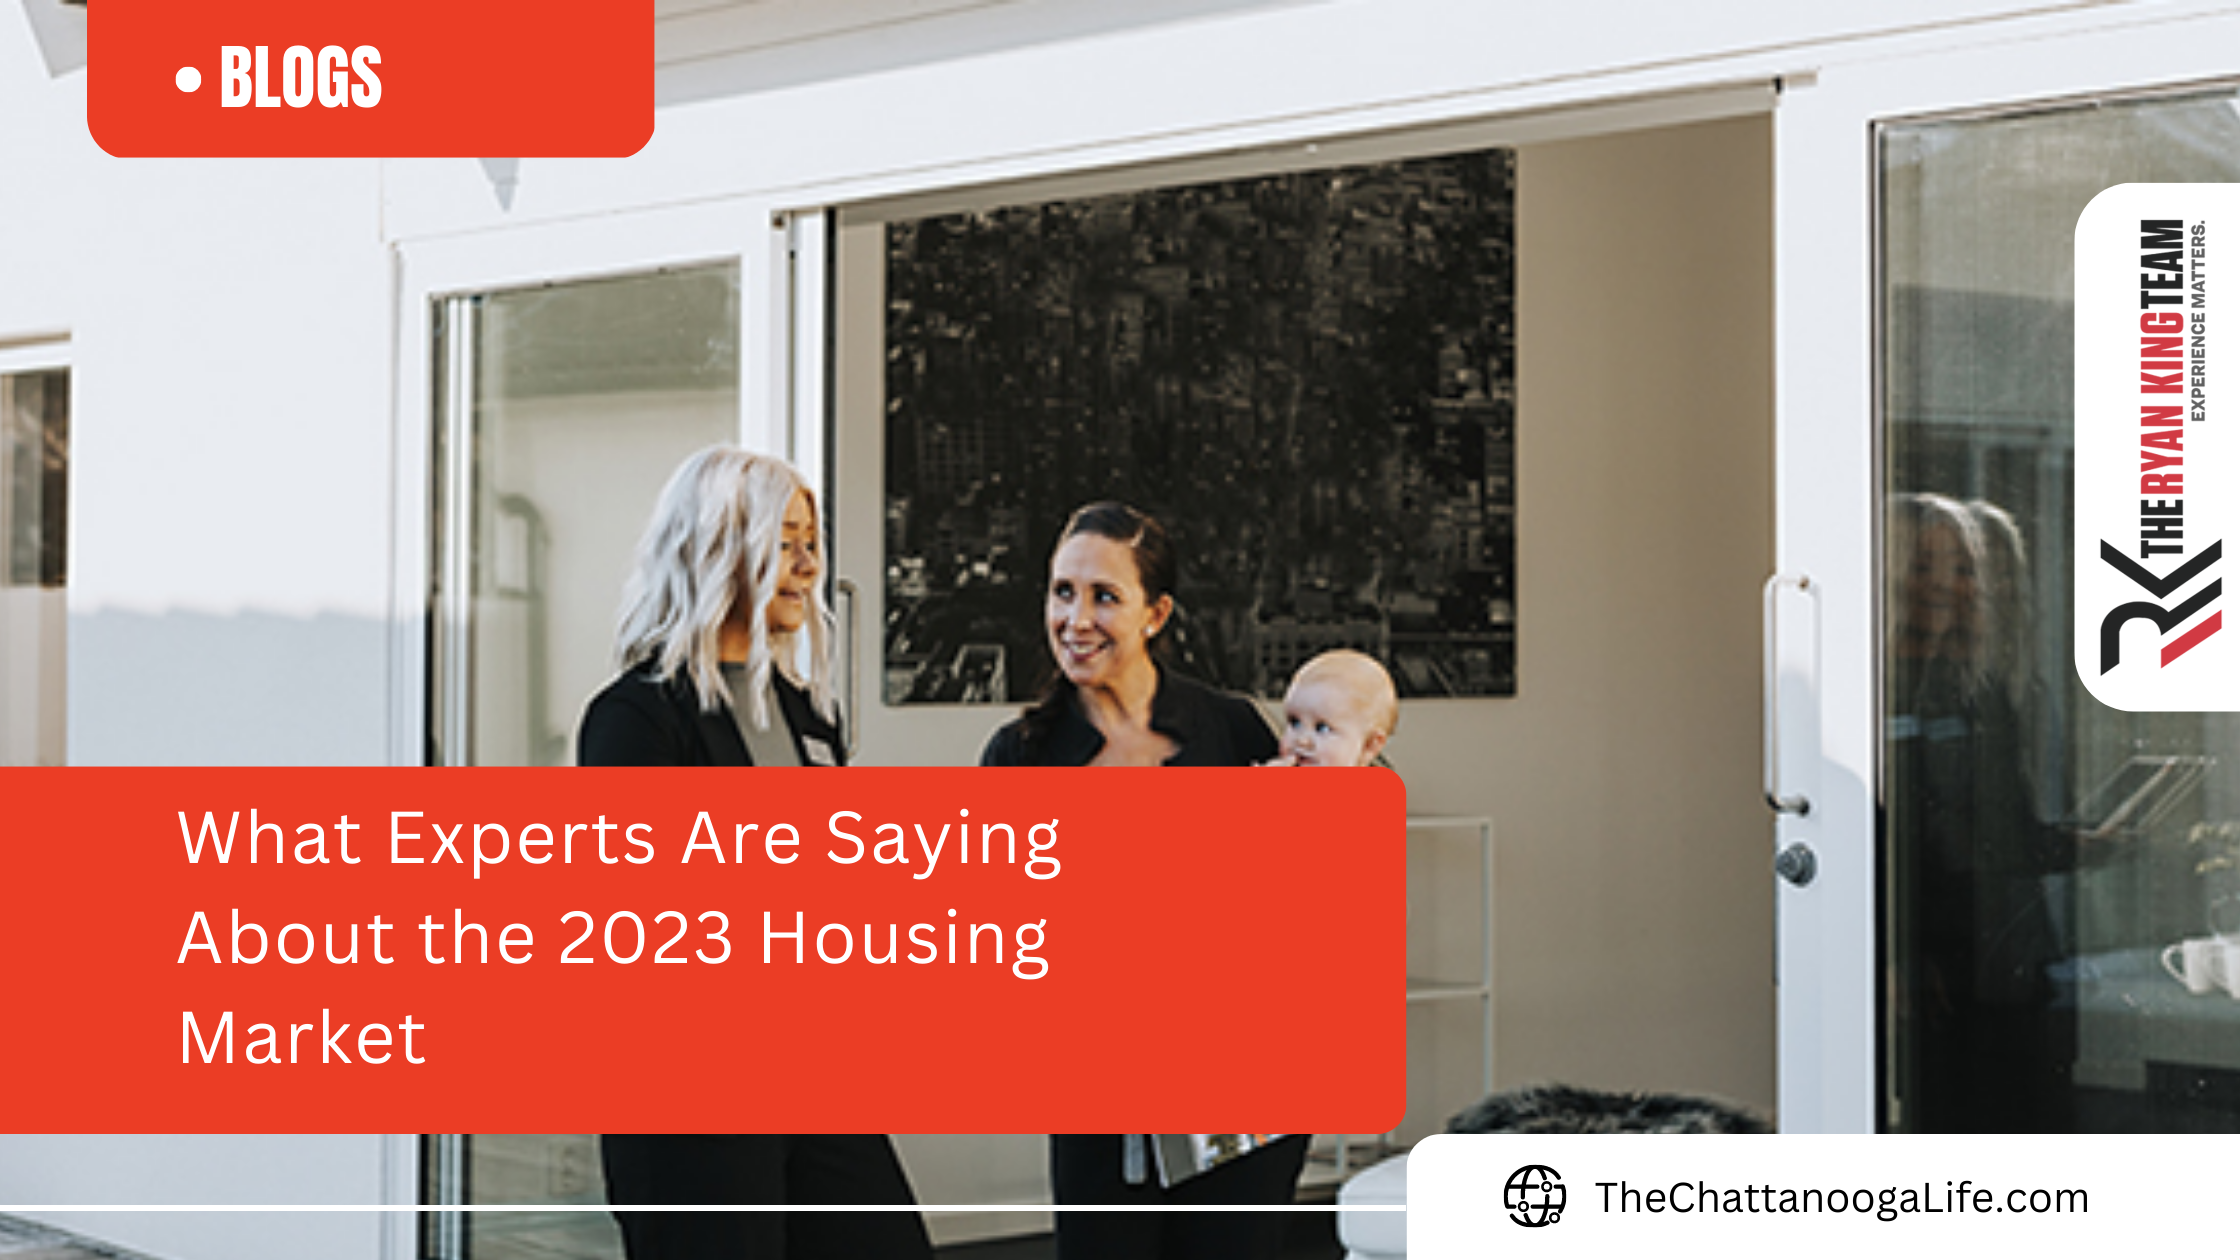 What Experts Are Saying About the 2023 Housing Market